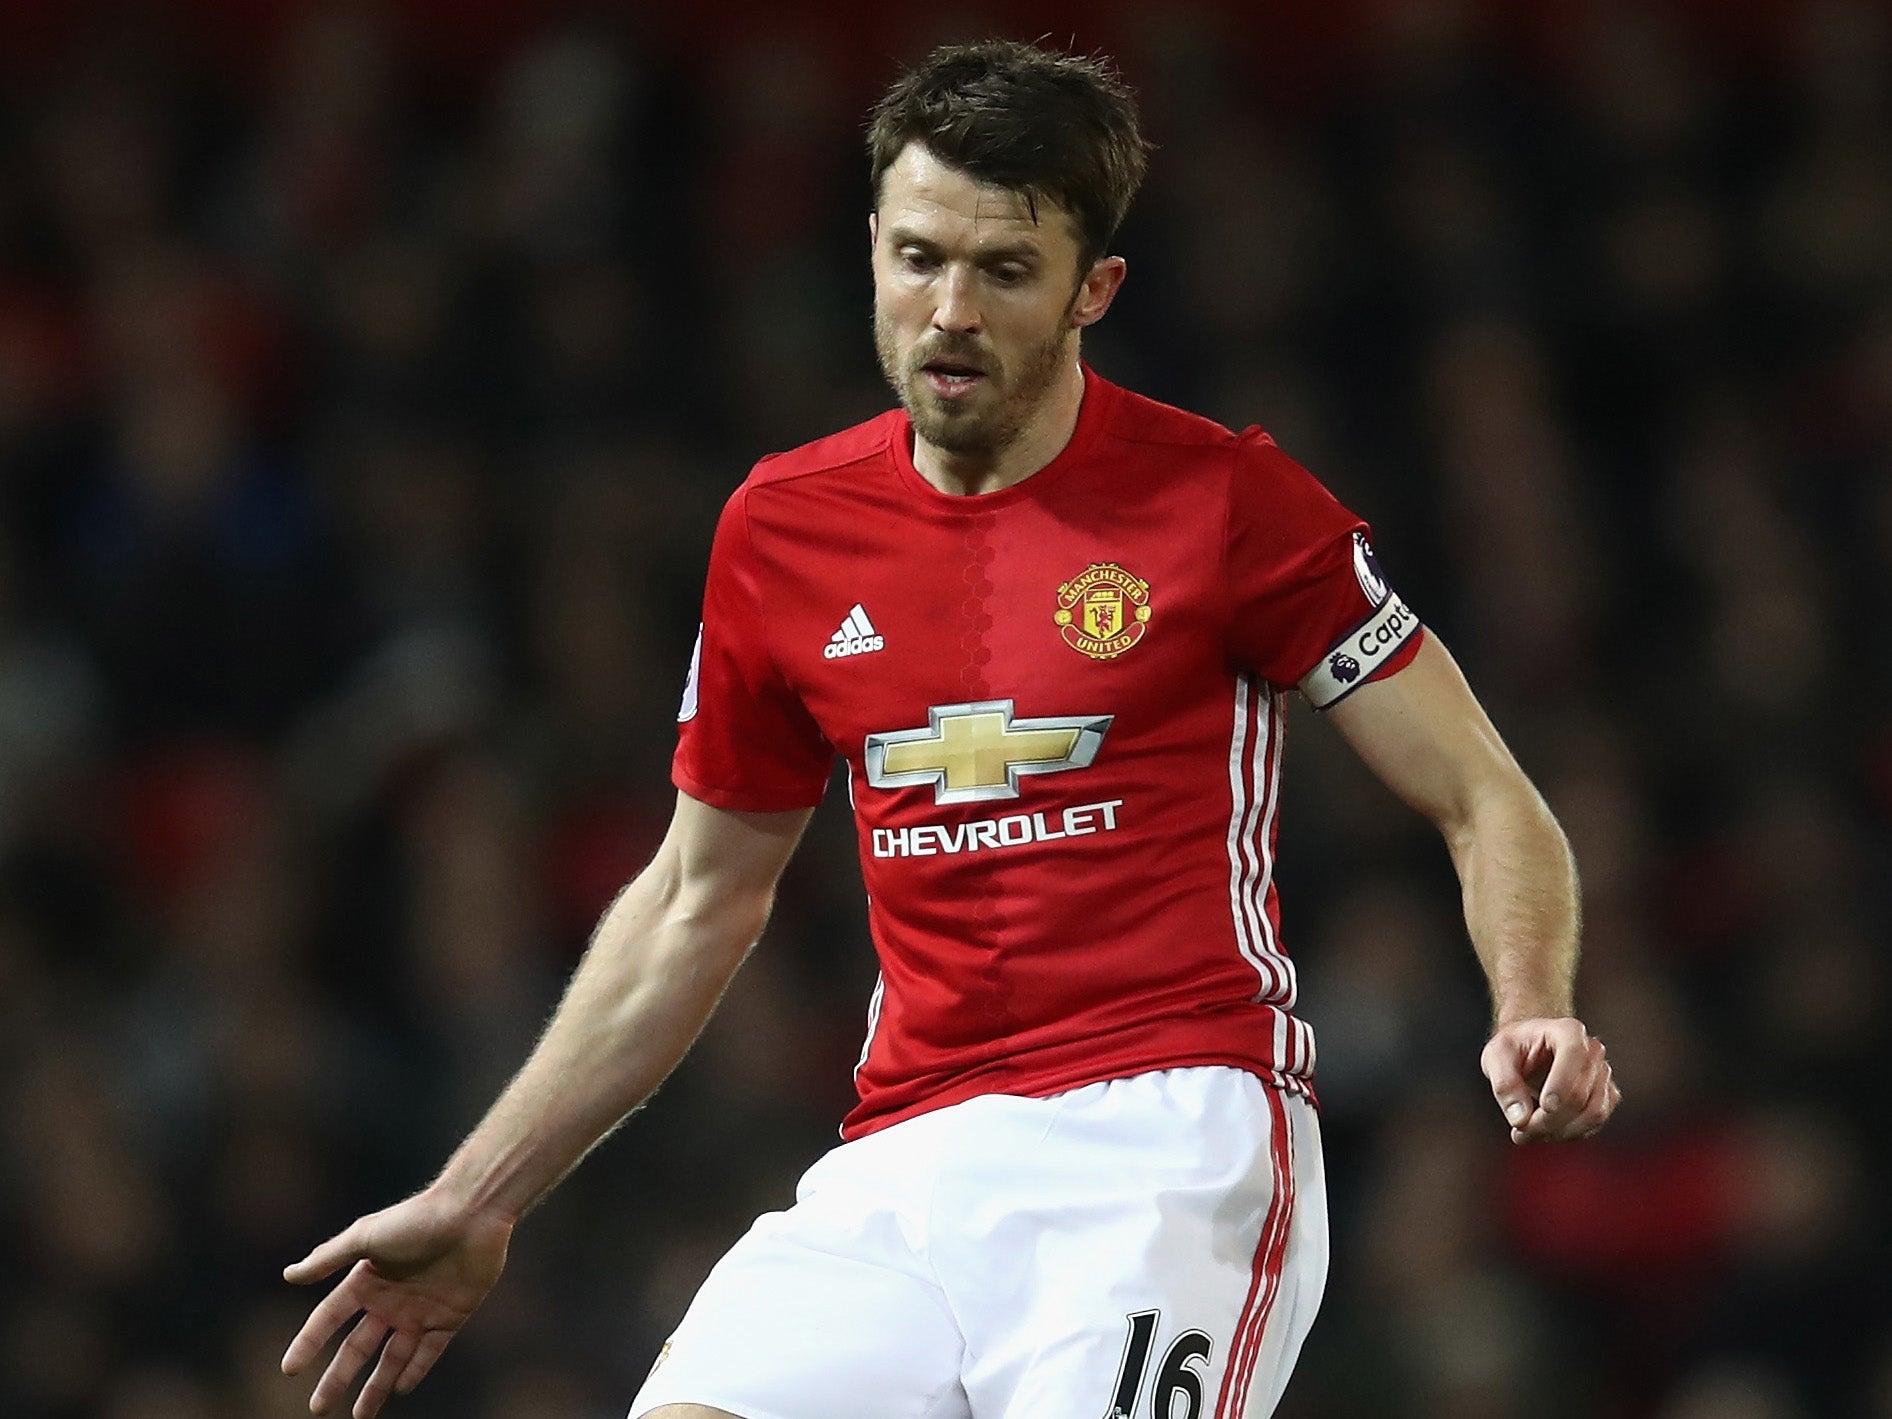 Carrick will captain the side on Monday night in Wayne Rooney's absence